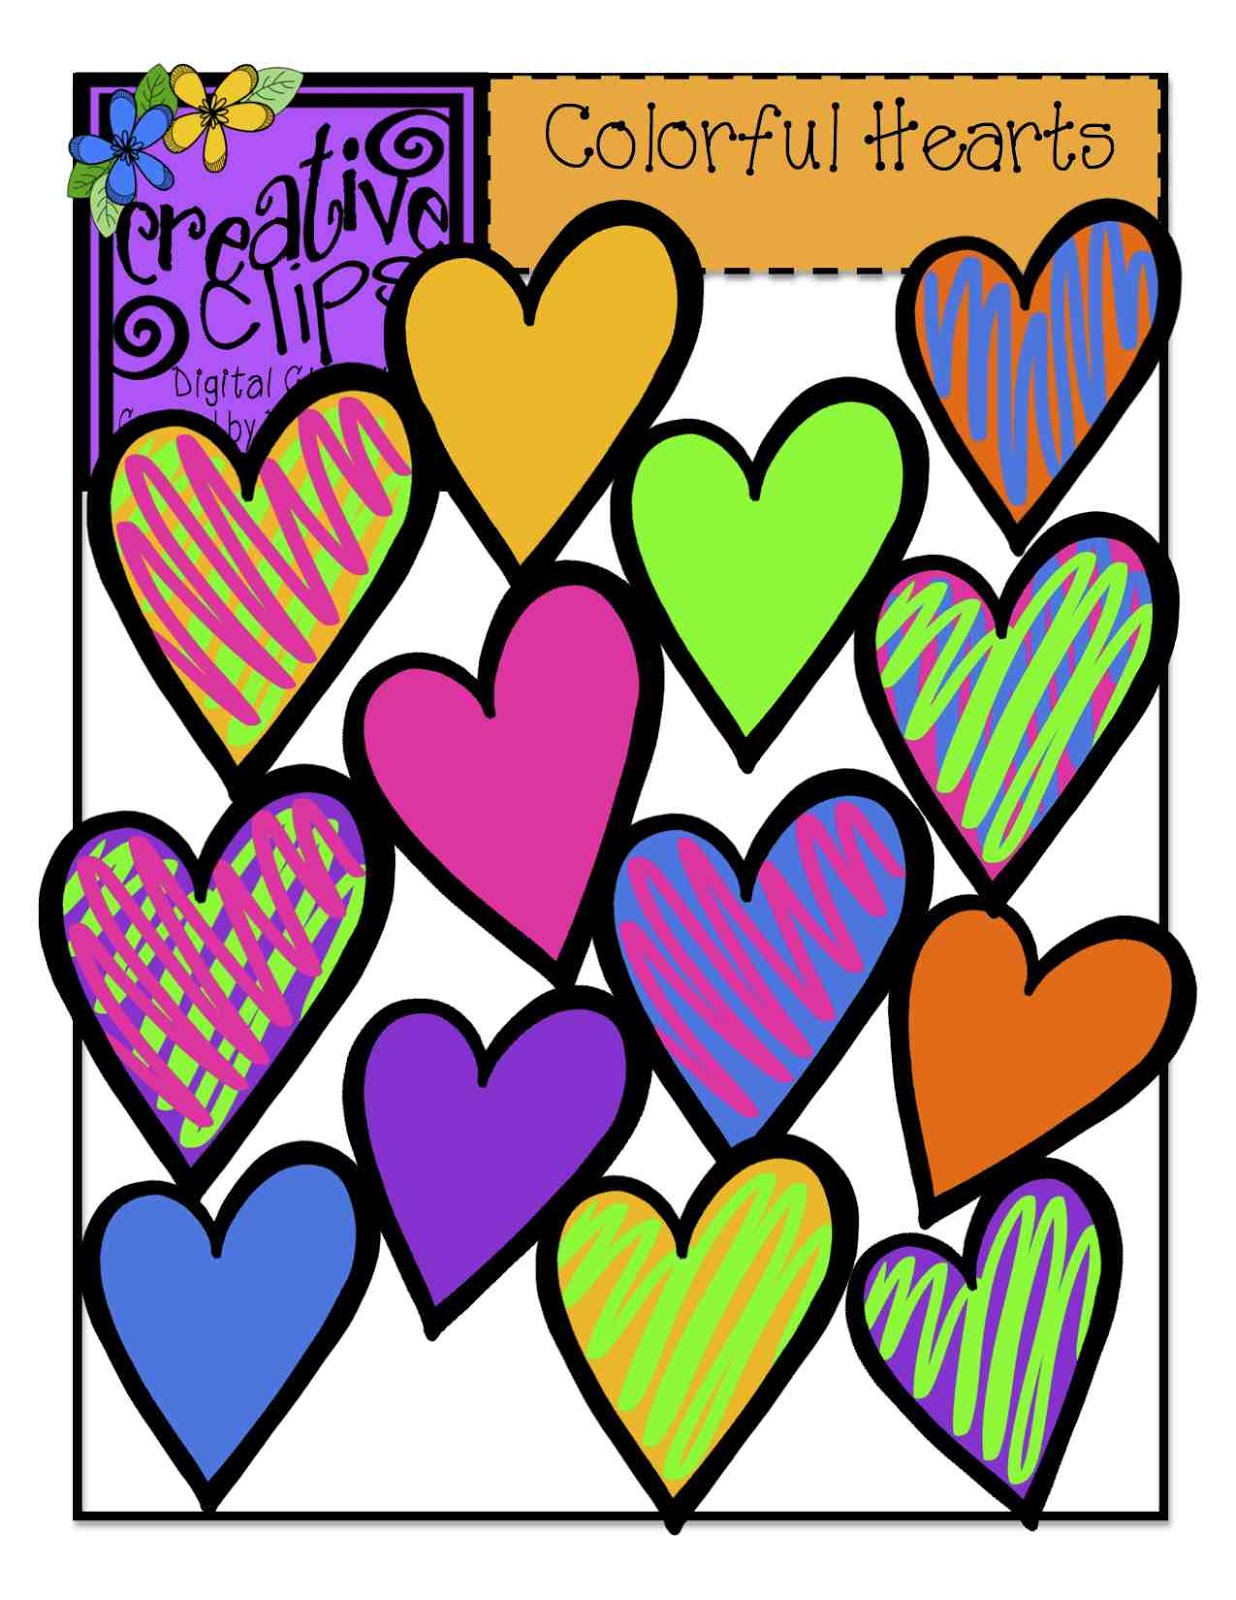 The Creative Chalkboard: You can have my heart {clipart} for free :)